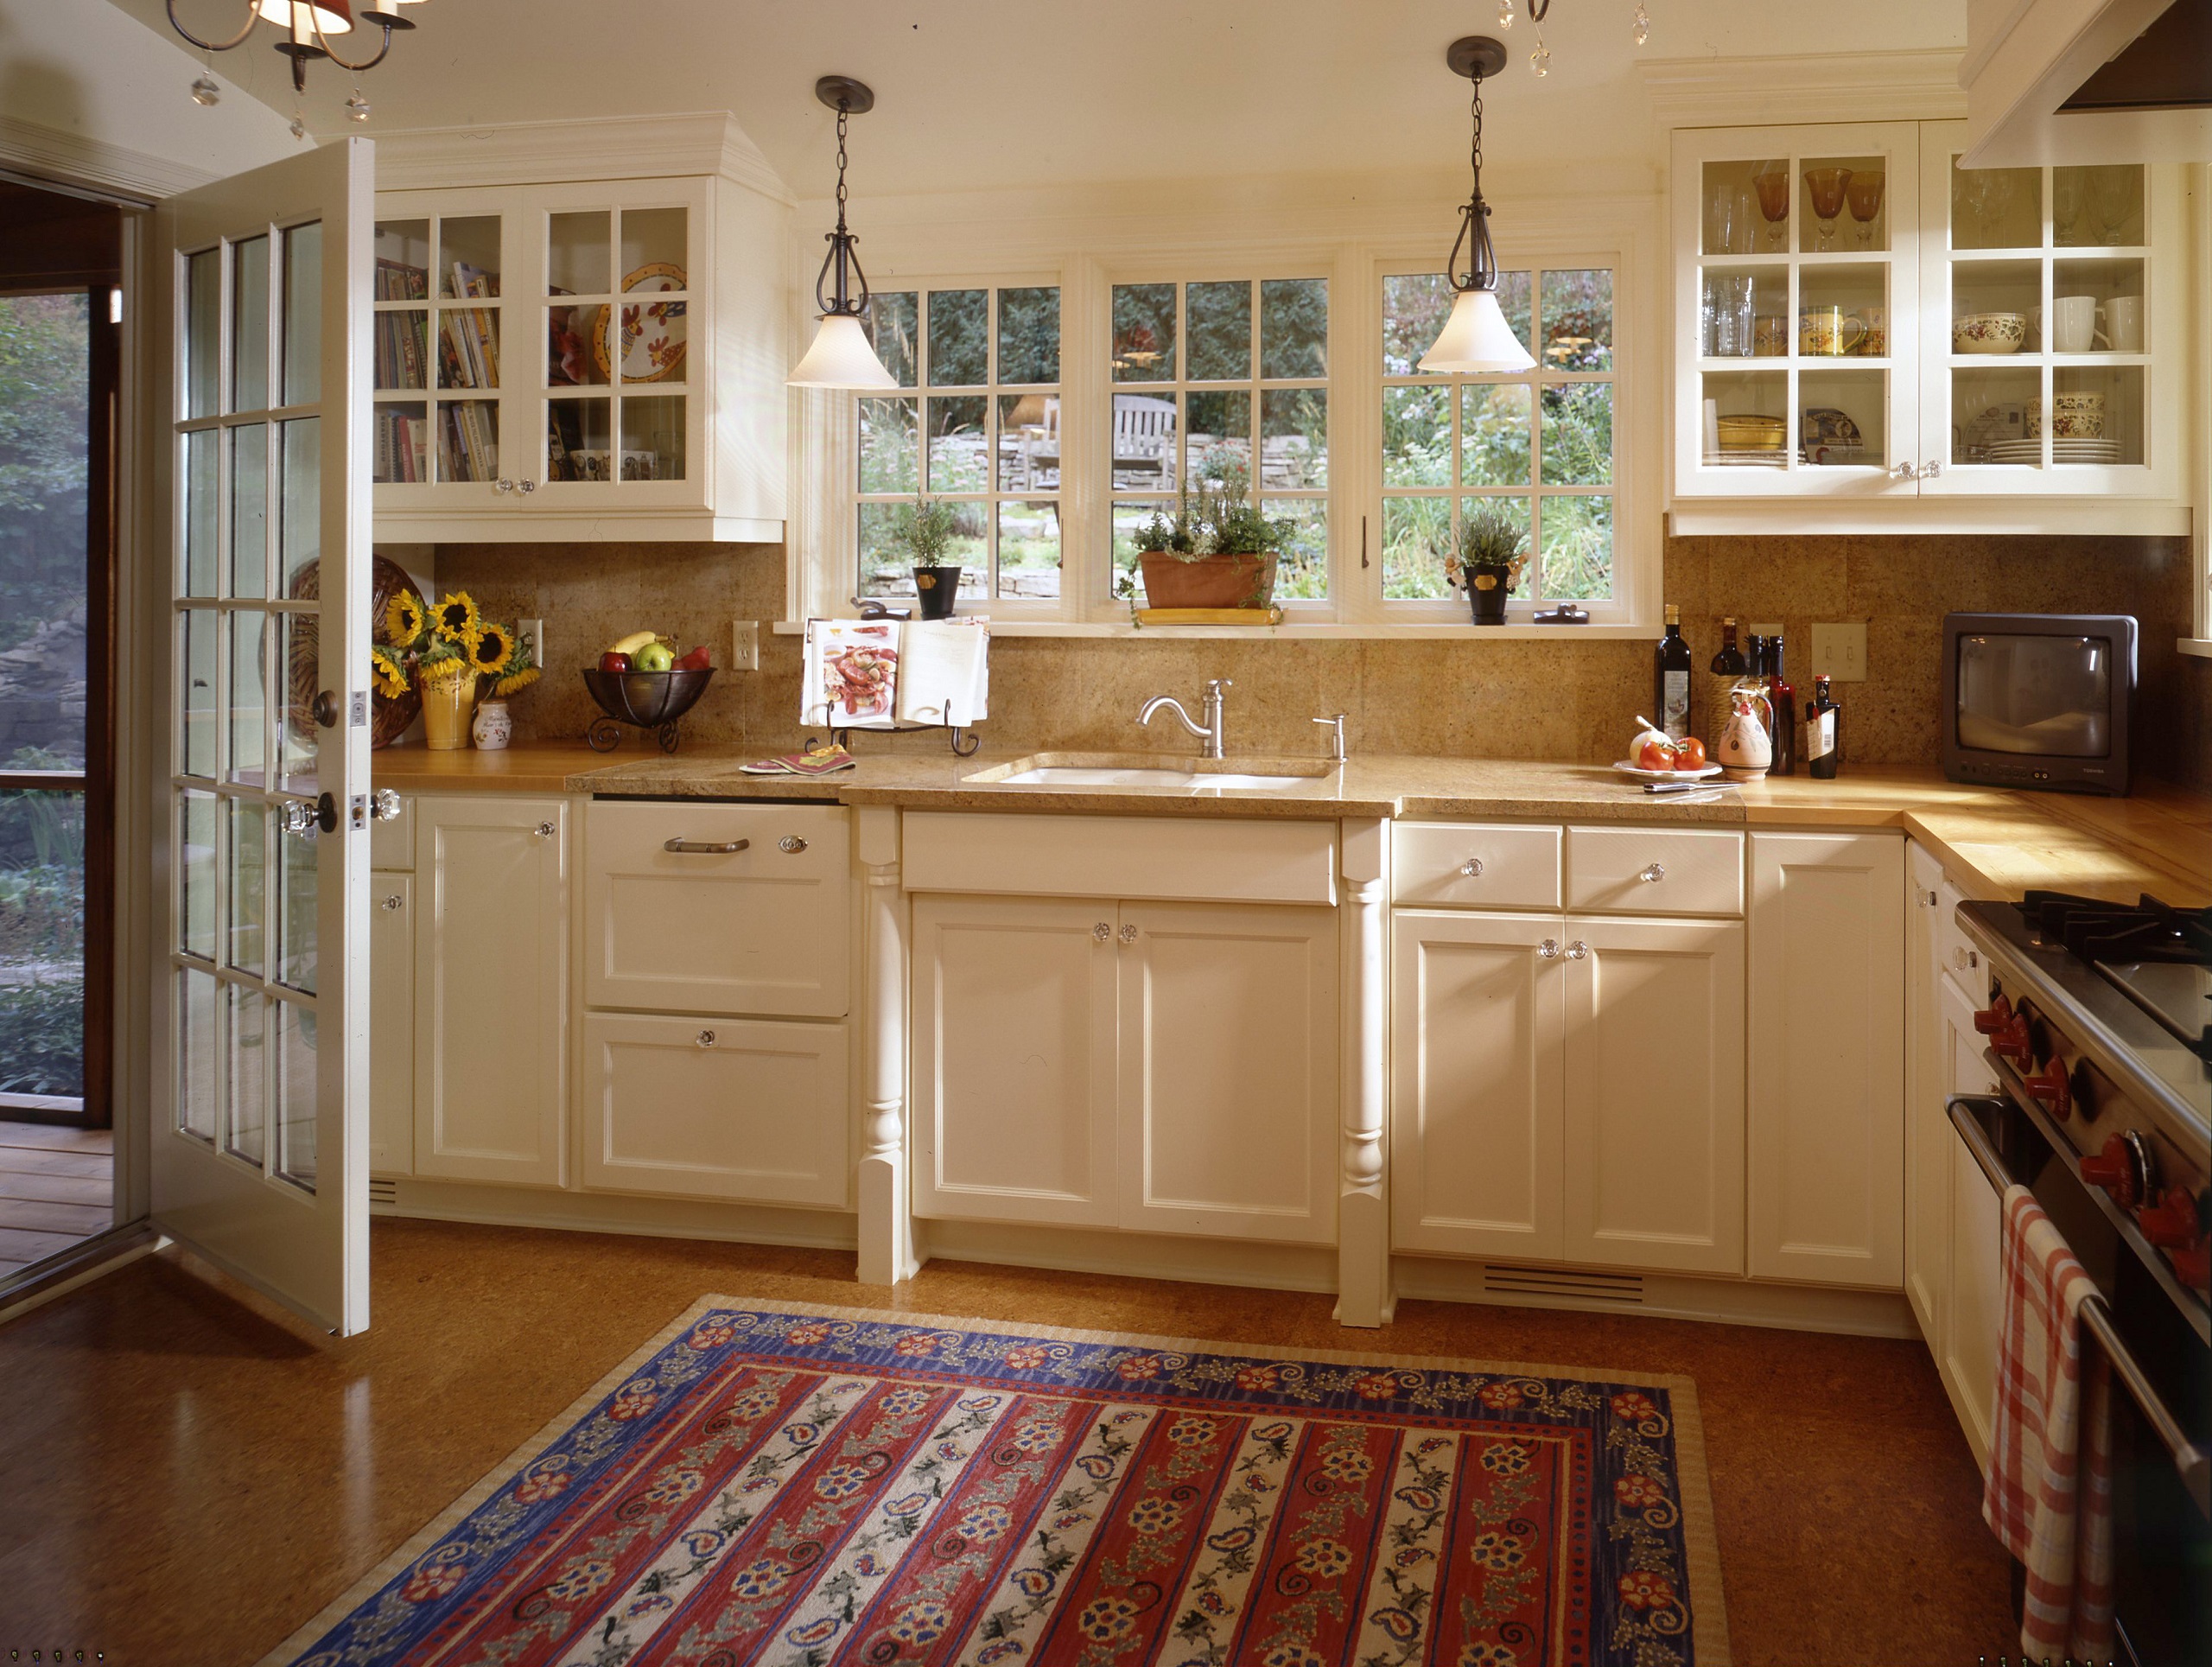 Remodeled kitchen with white cabinets, windows, lights, and a colored rug.